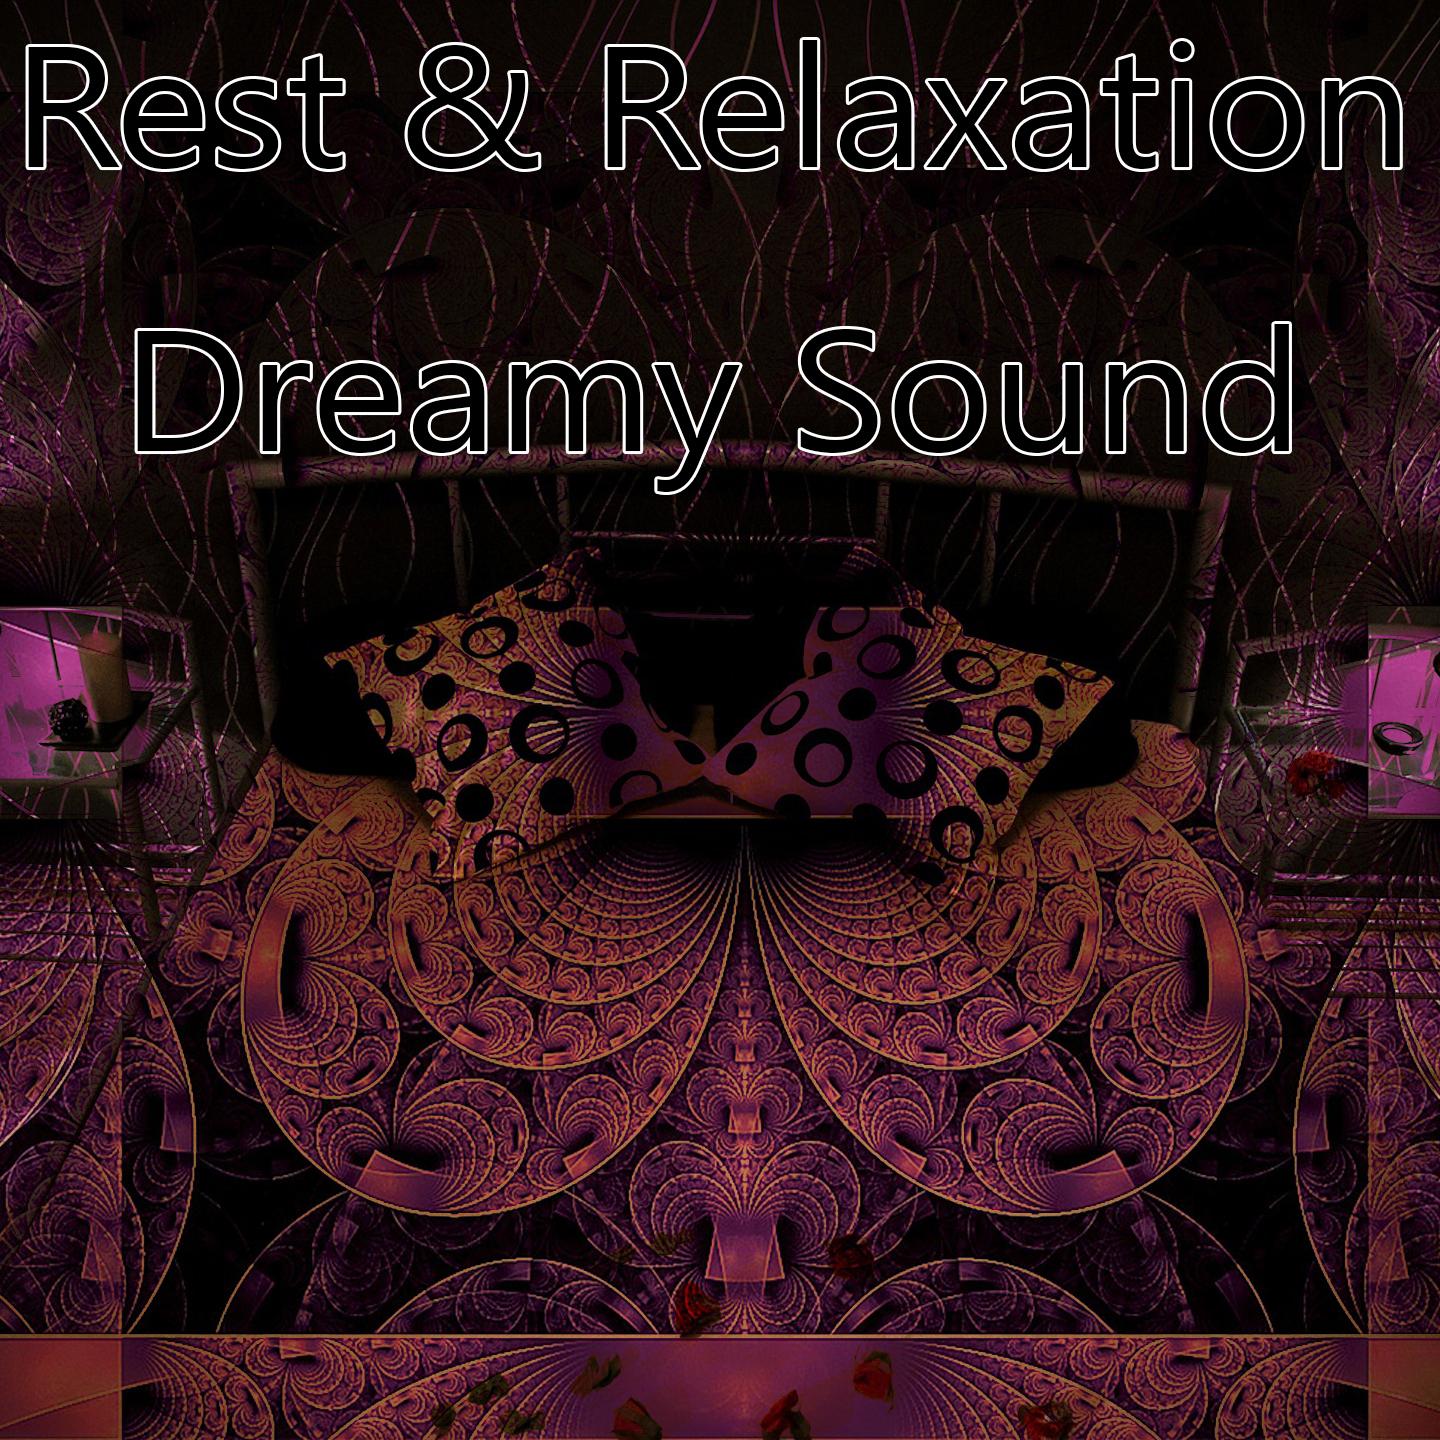 Rest & Relaxation Dreamy Sound